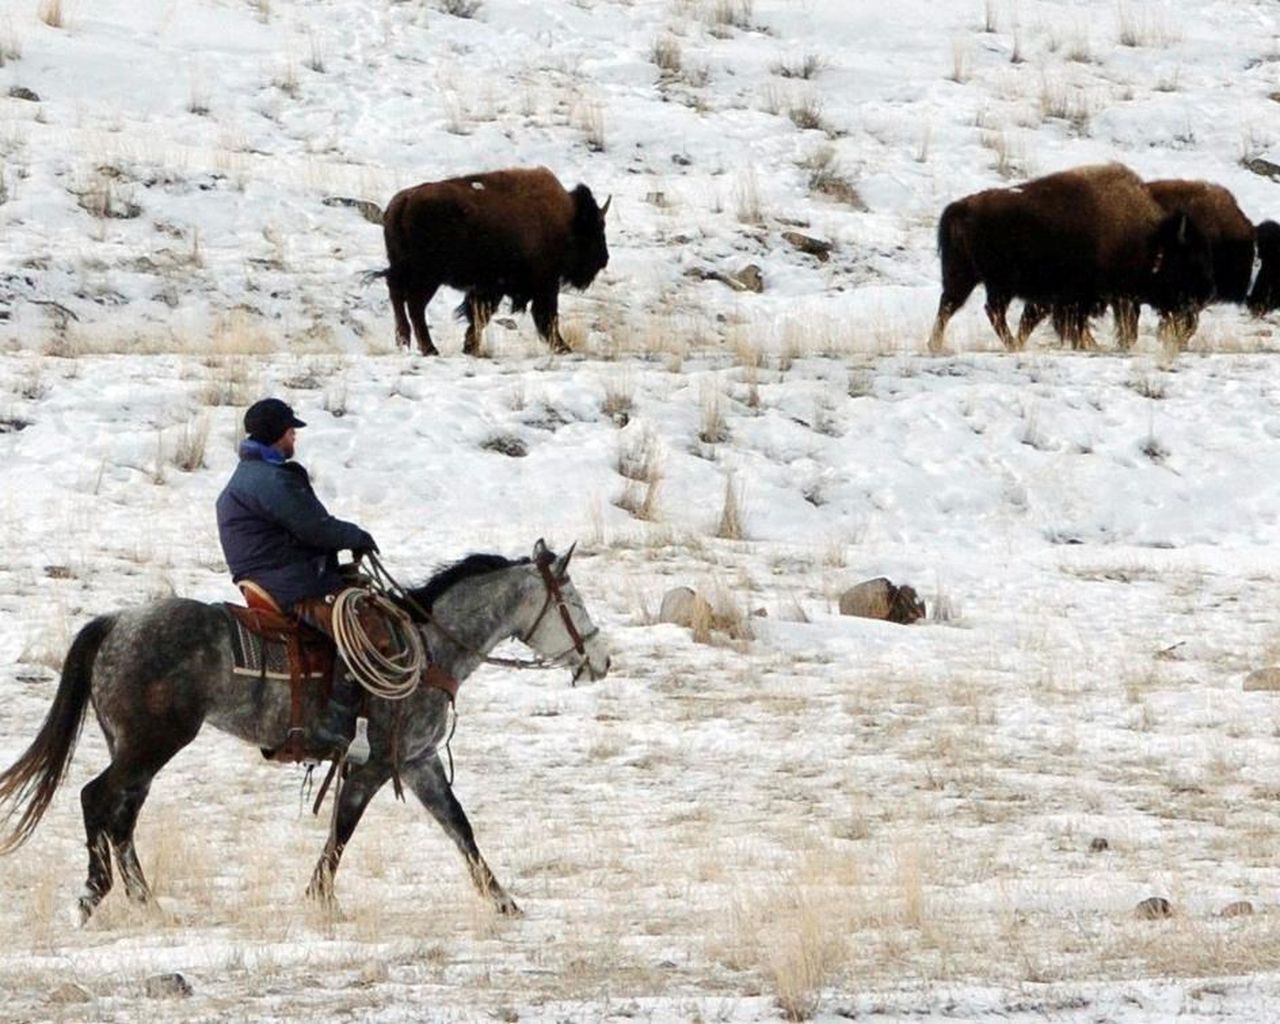 Documents detail push to manage Yellowstone bison as cattle